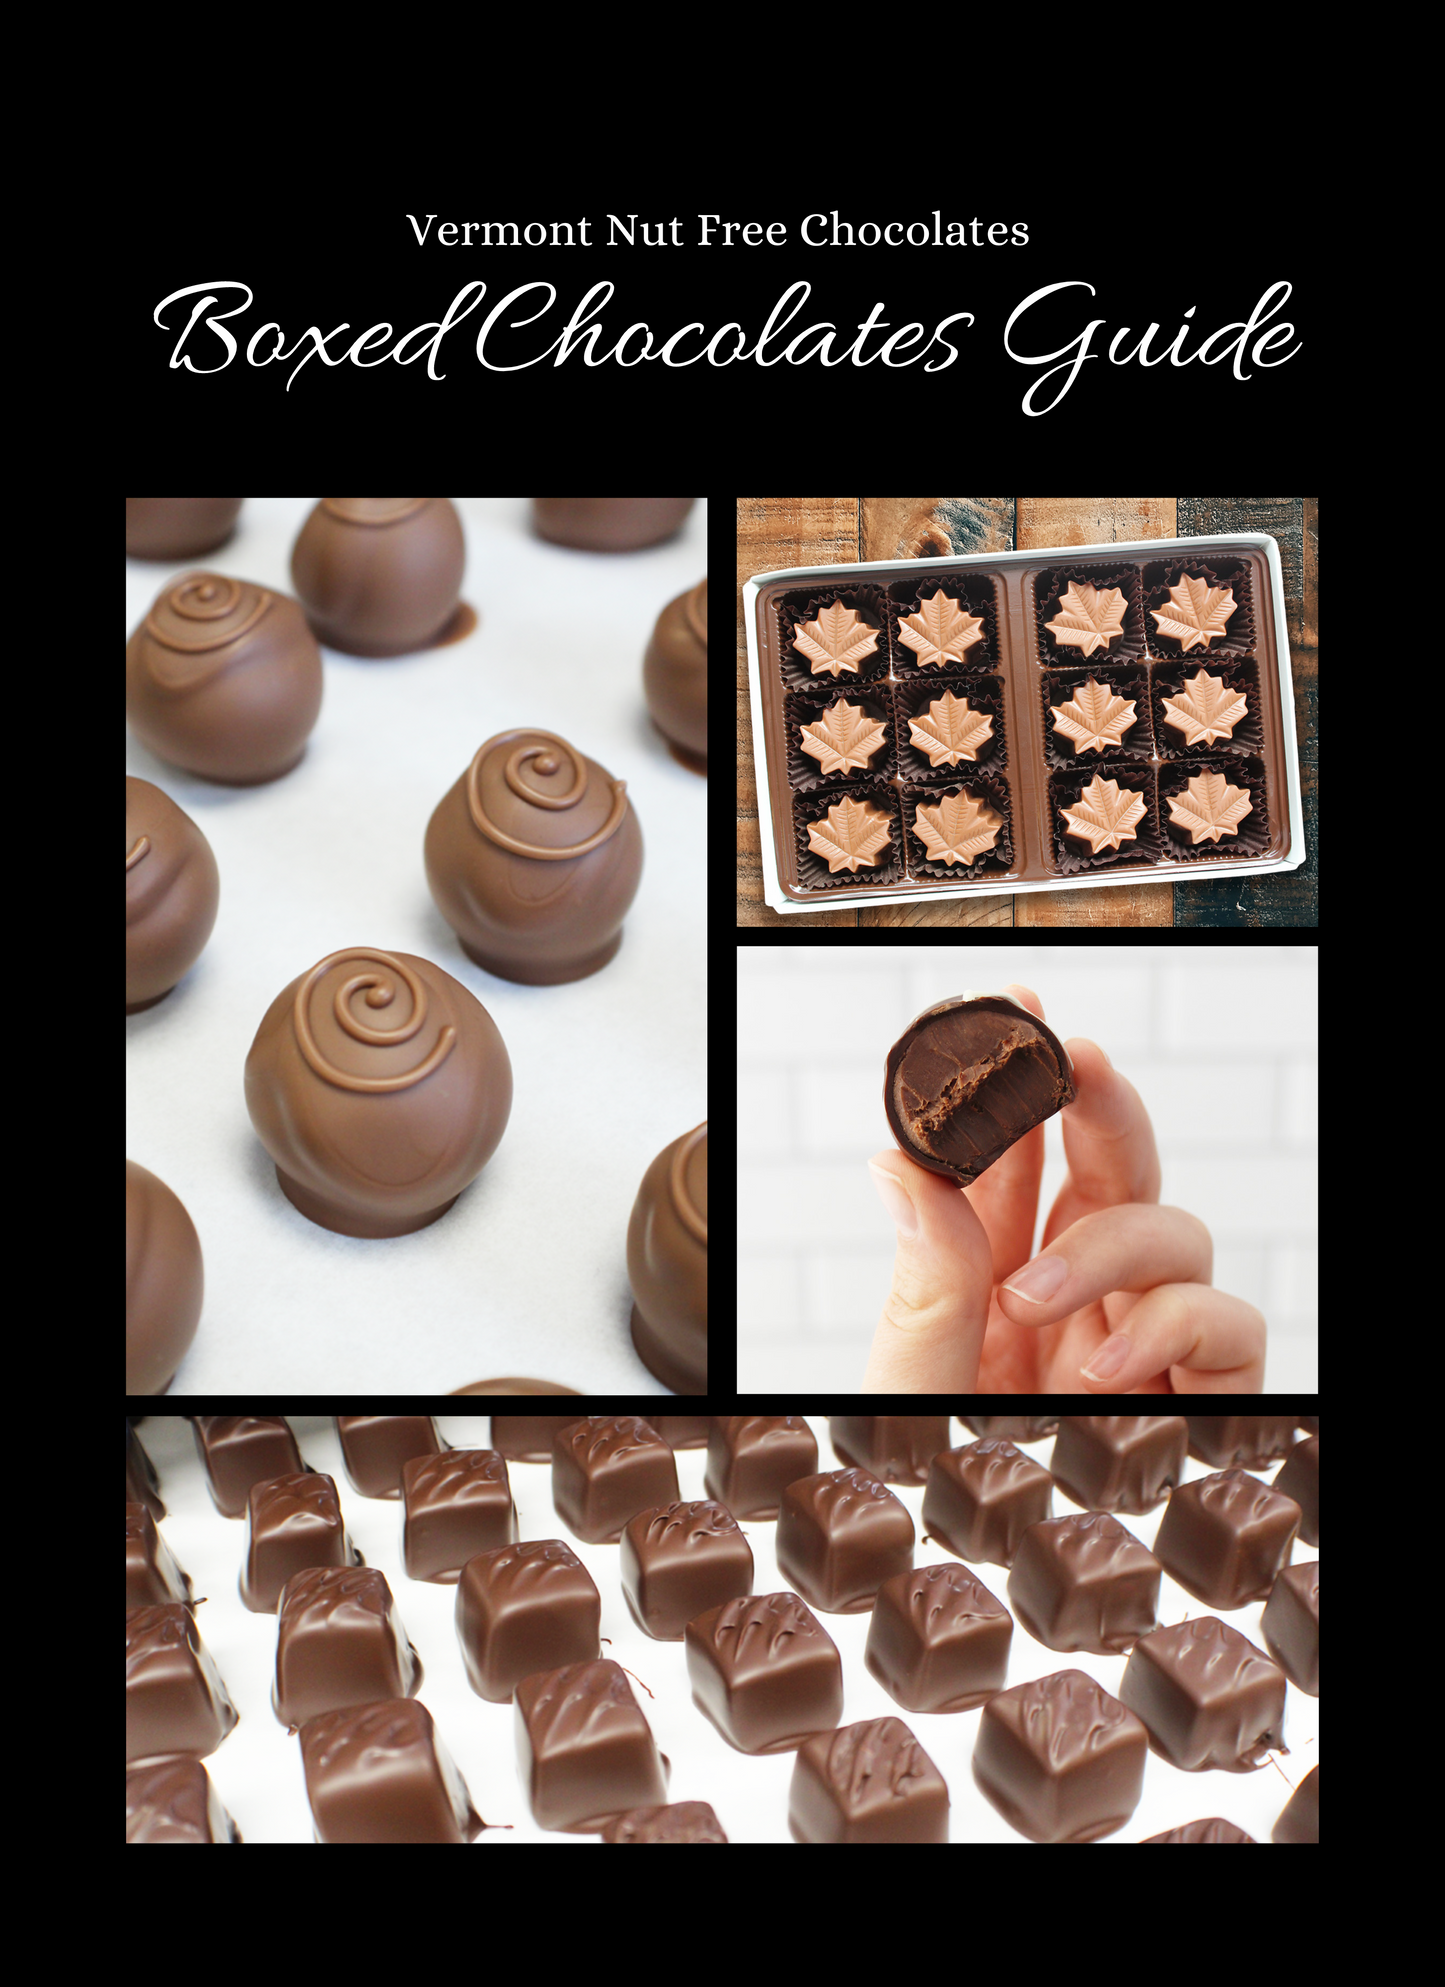 The Vermont Nut Free Chocolates Boxed Chocolates Guide with pictures of truffles, caramels, and maple creams.